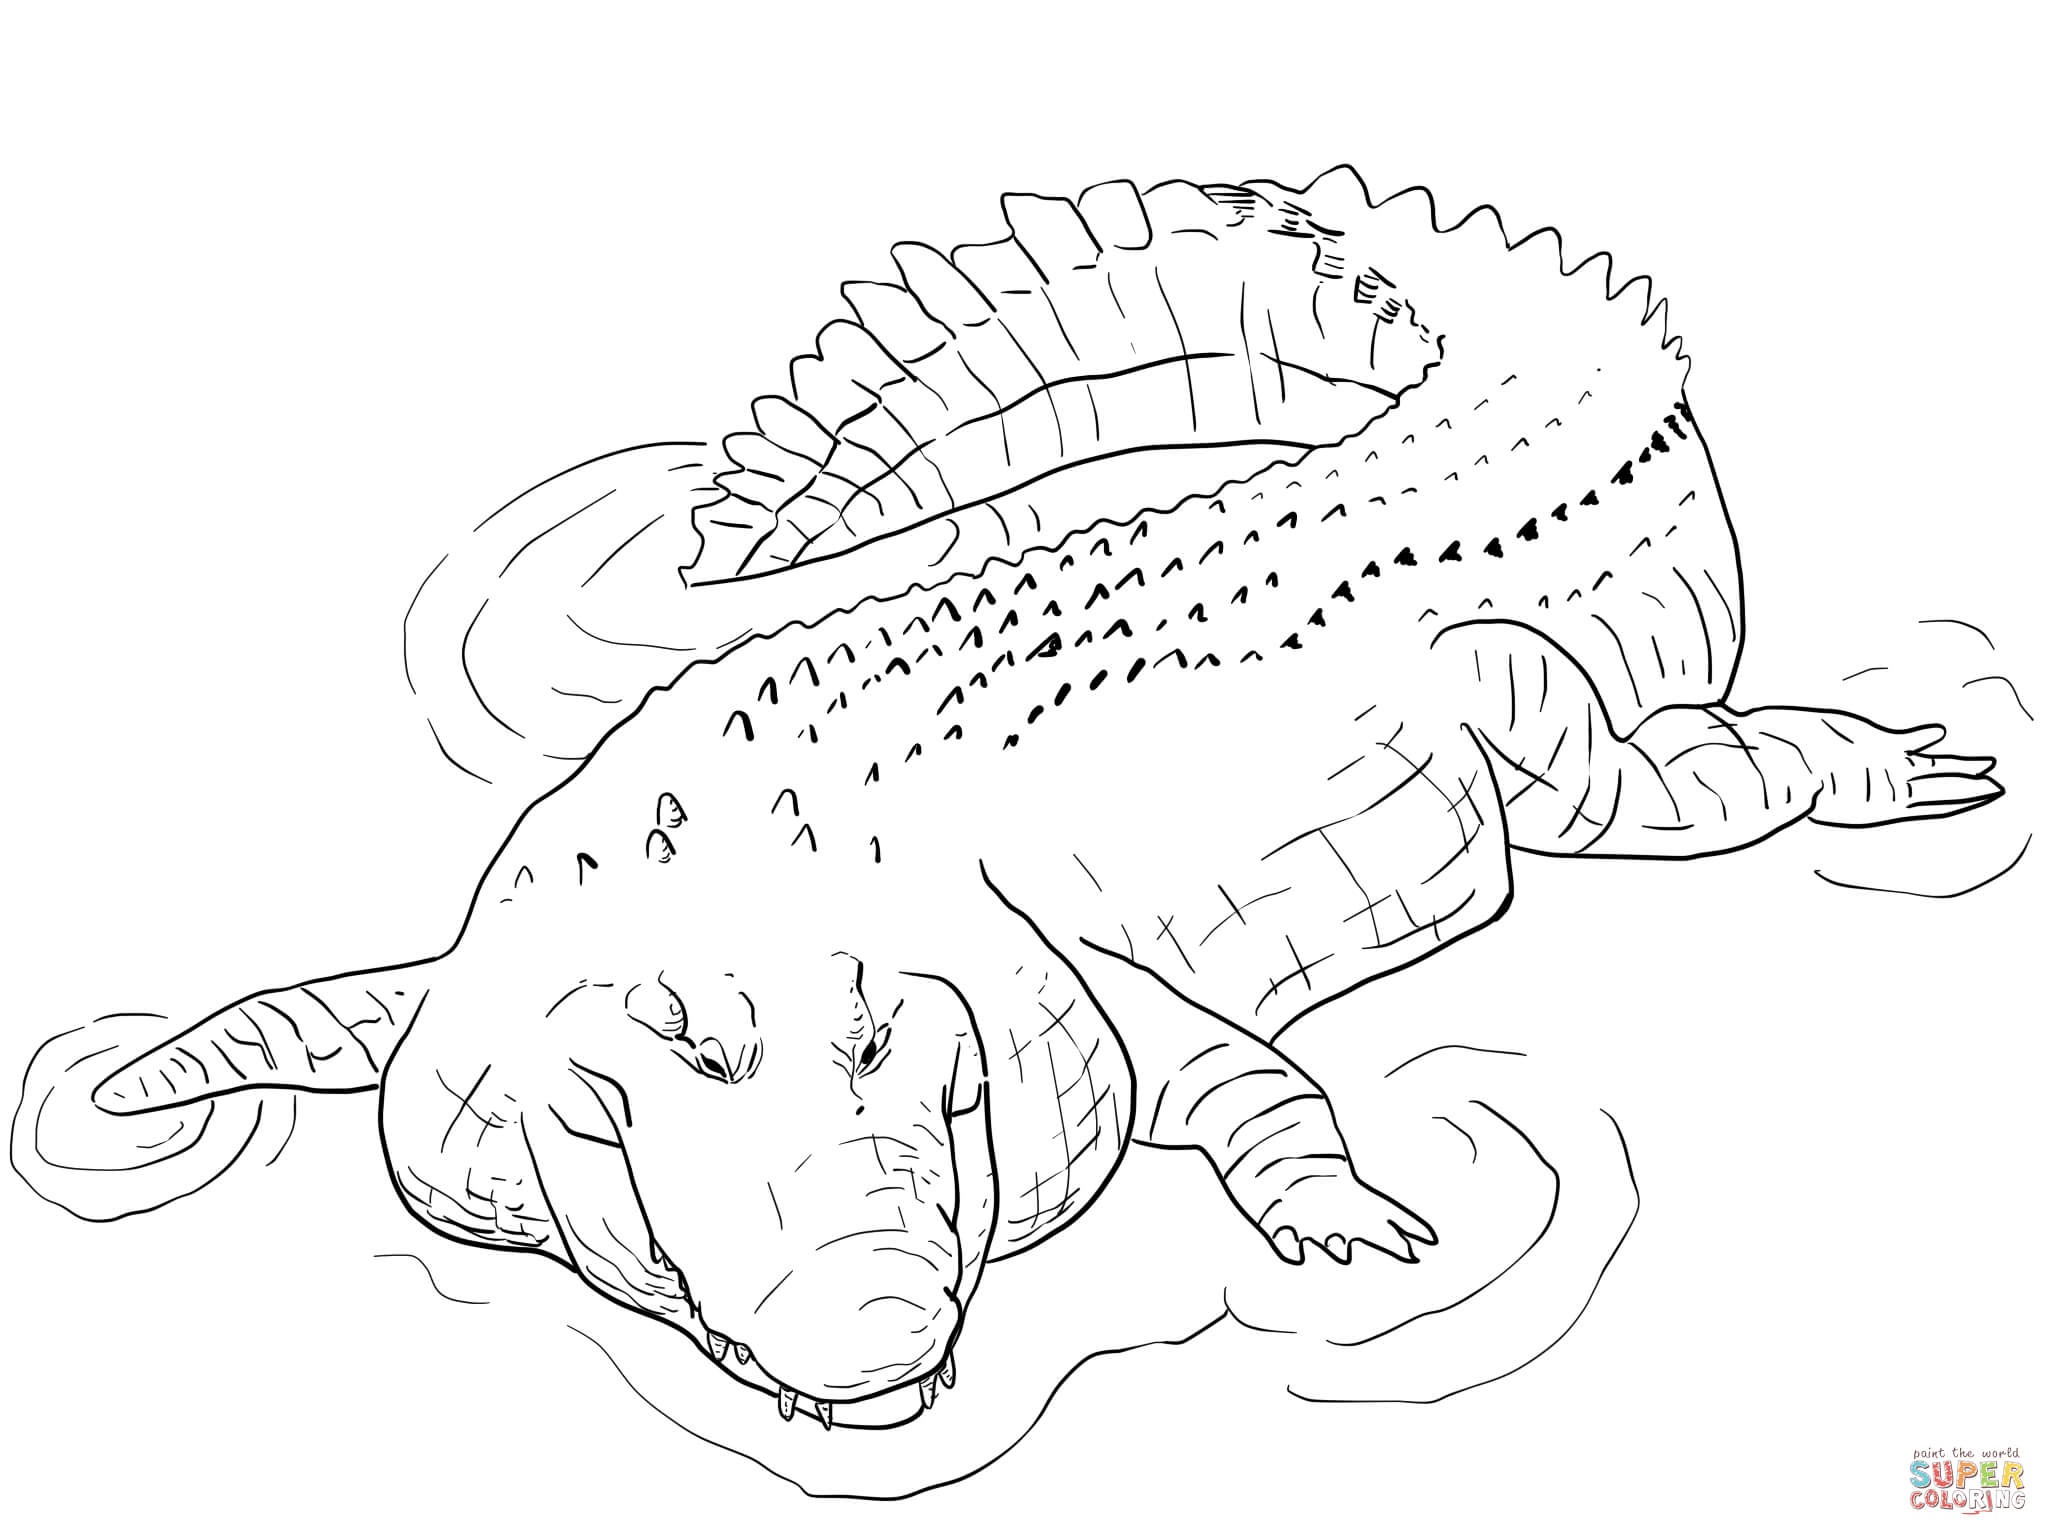 Crocodile Coloring Pages | Free Coloring Pages - Free Printable Pictures Of Crocodiles